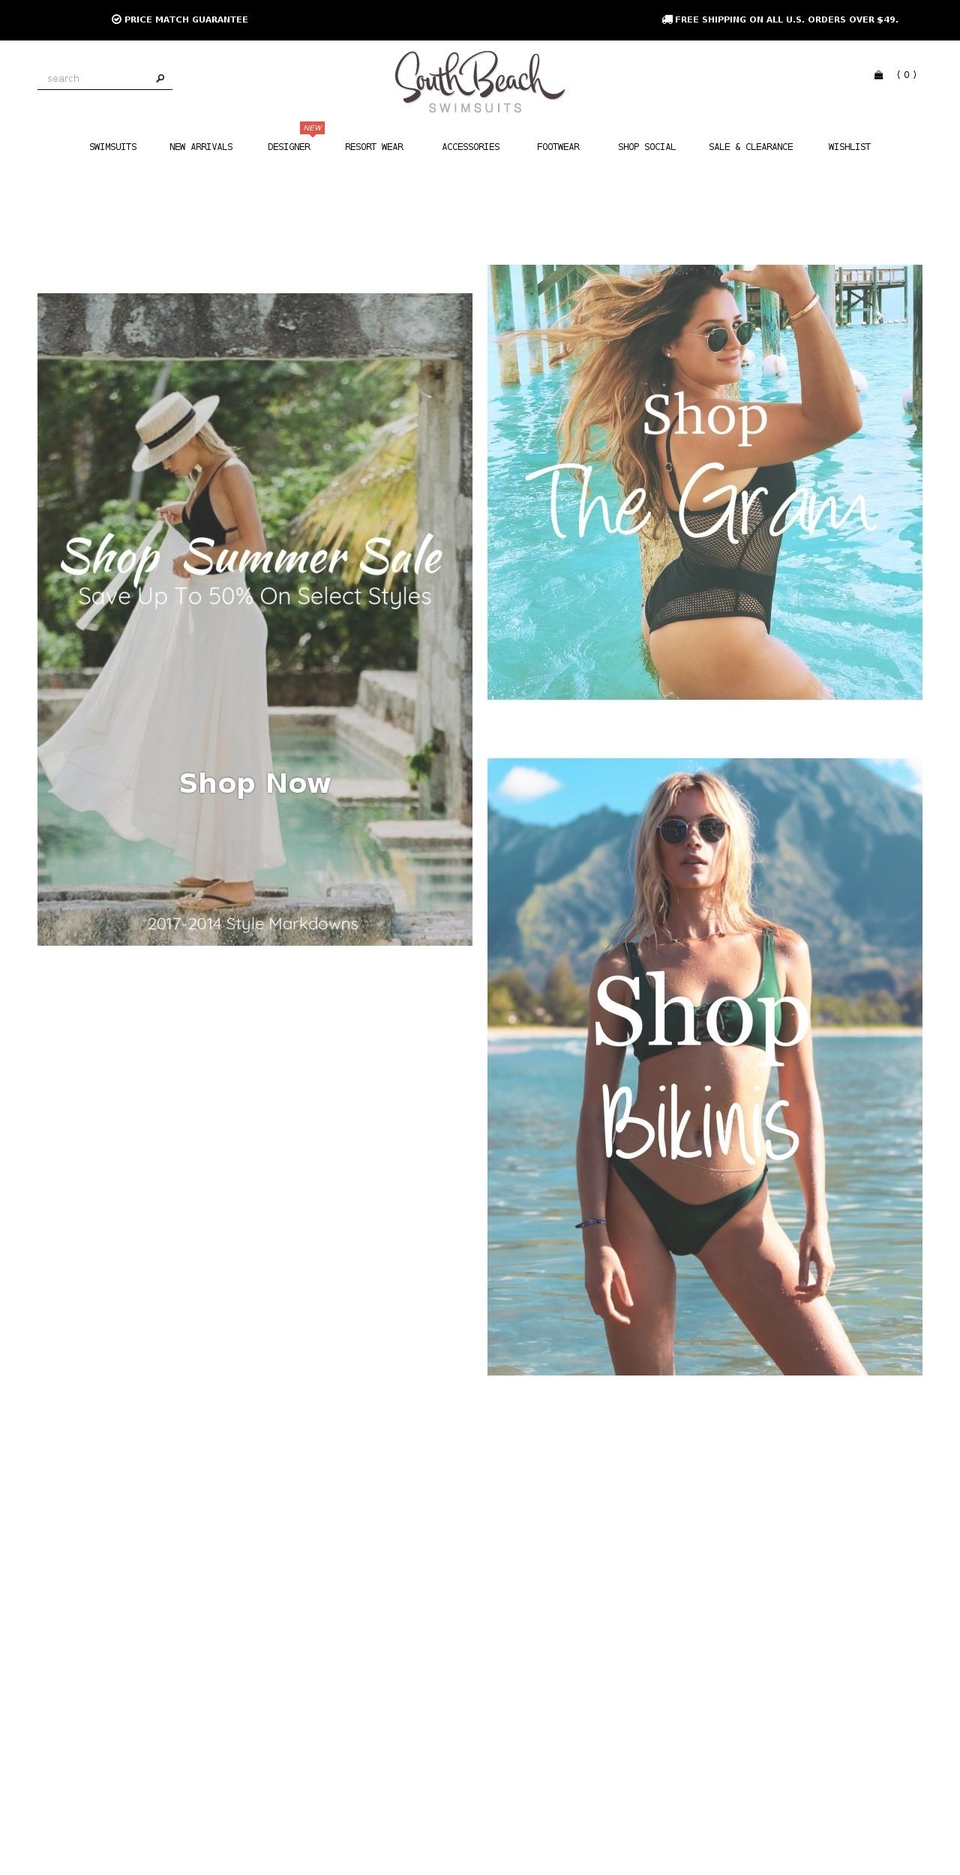 Made With ❤ By Minion Made - Updated Checkout Shopify theme site example southbeachswimsuitsonline.com